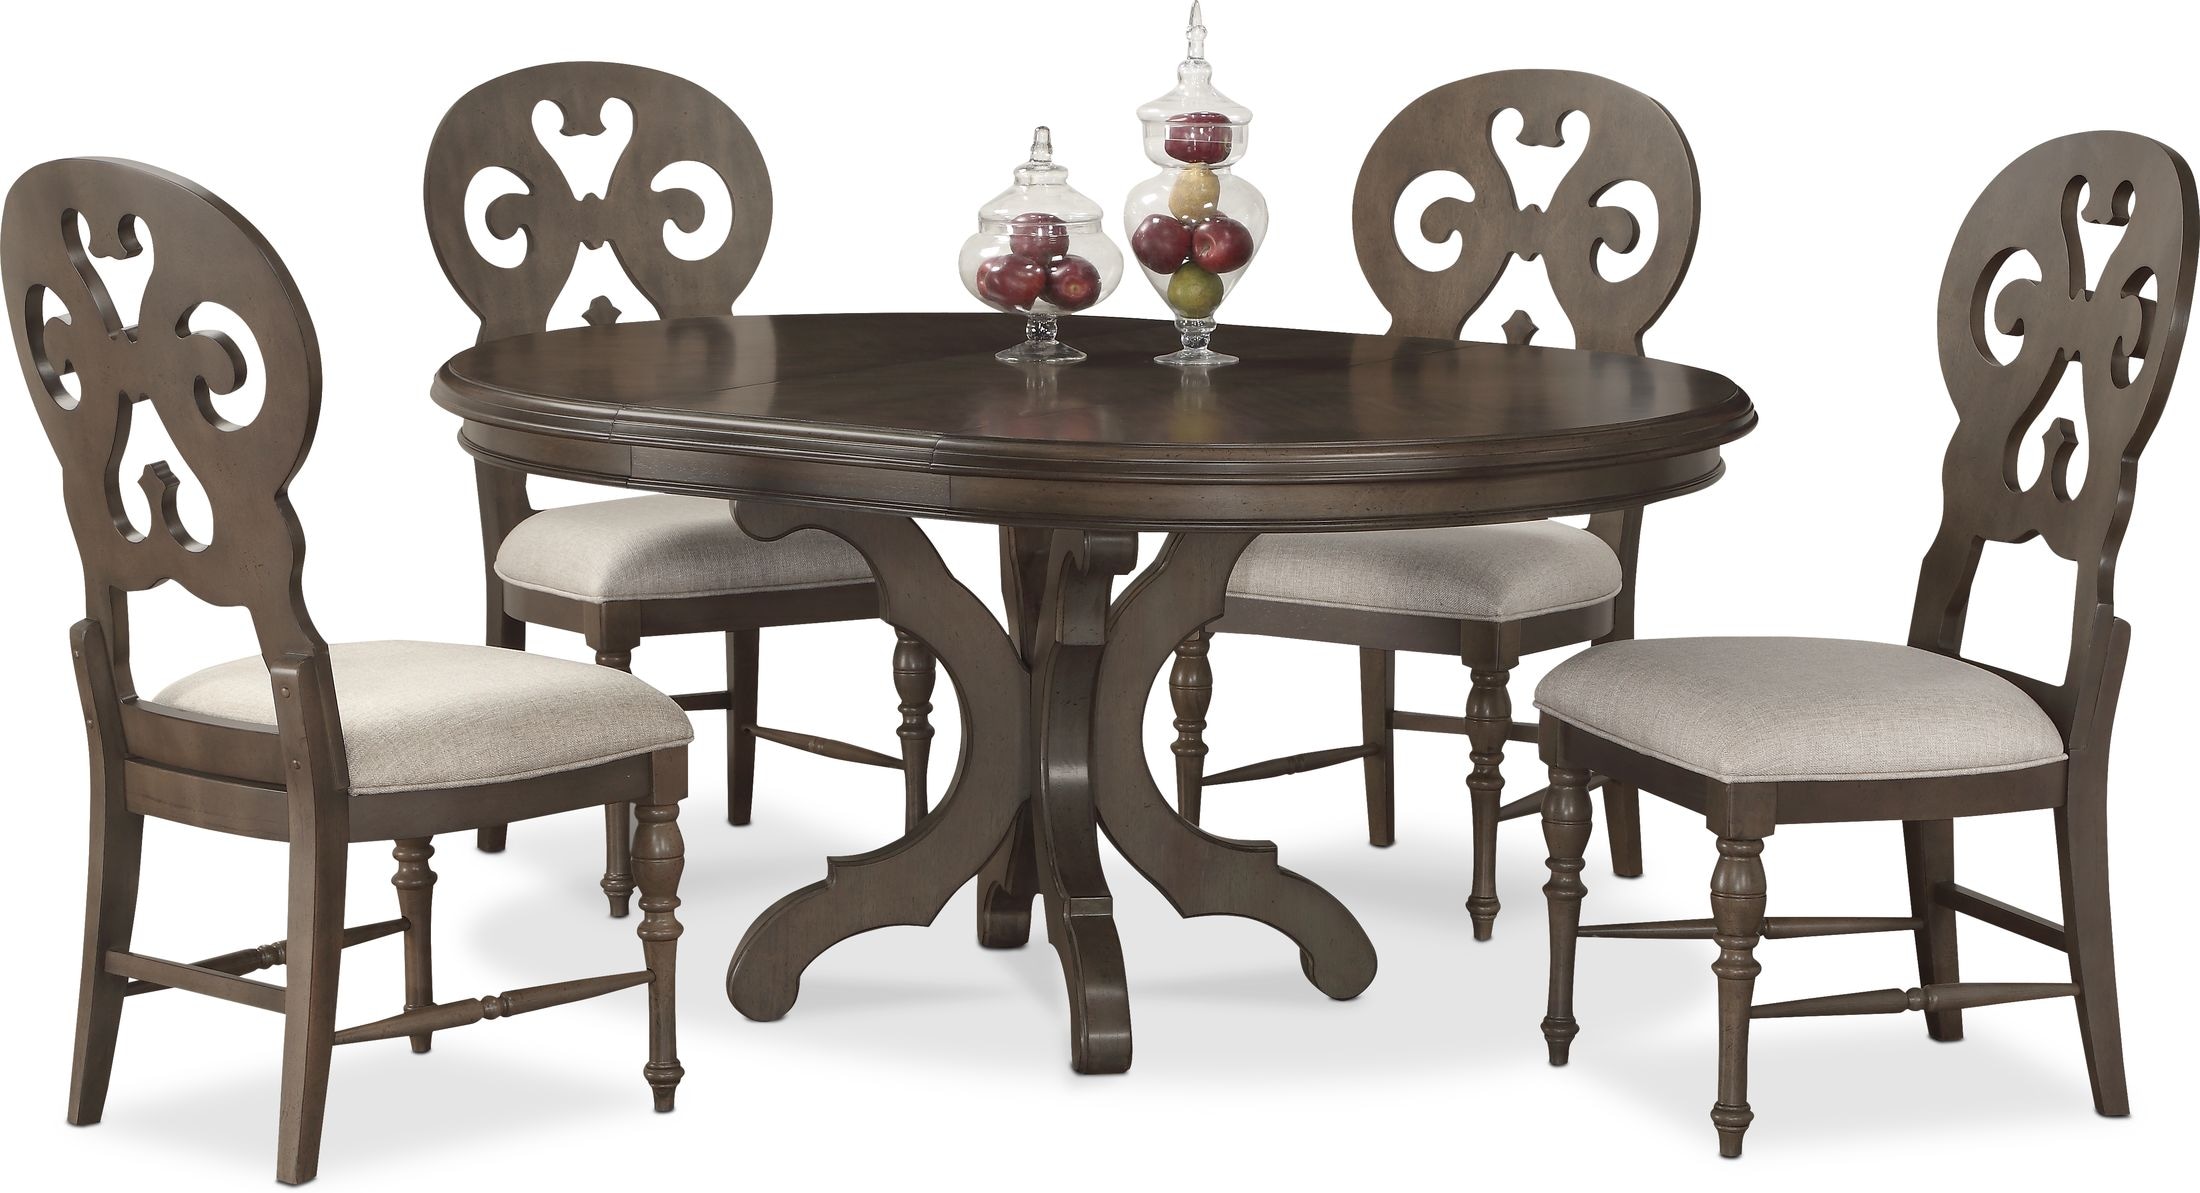 Value City Furniture Dining Chairs, Value City Dining Table And Chairs